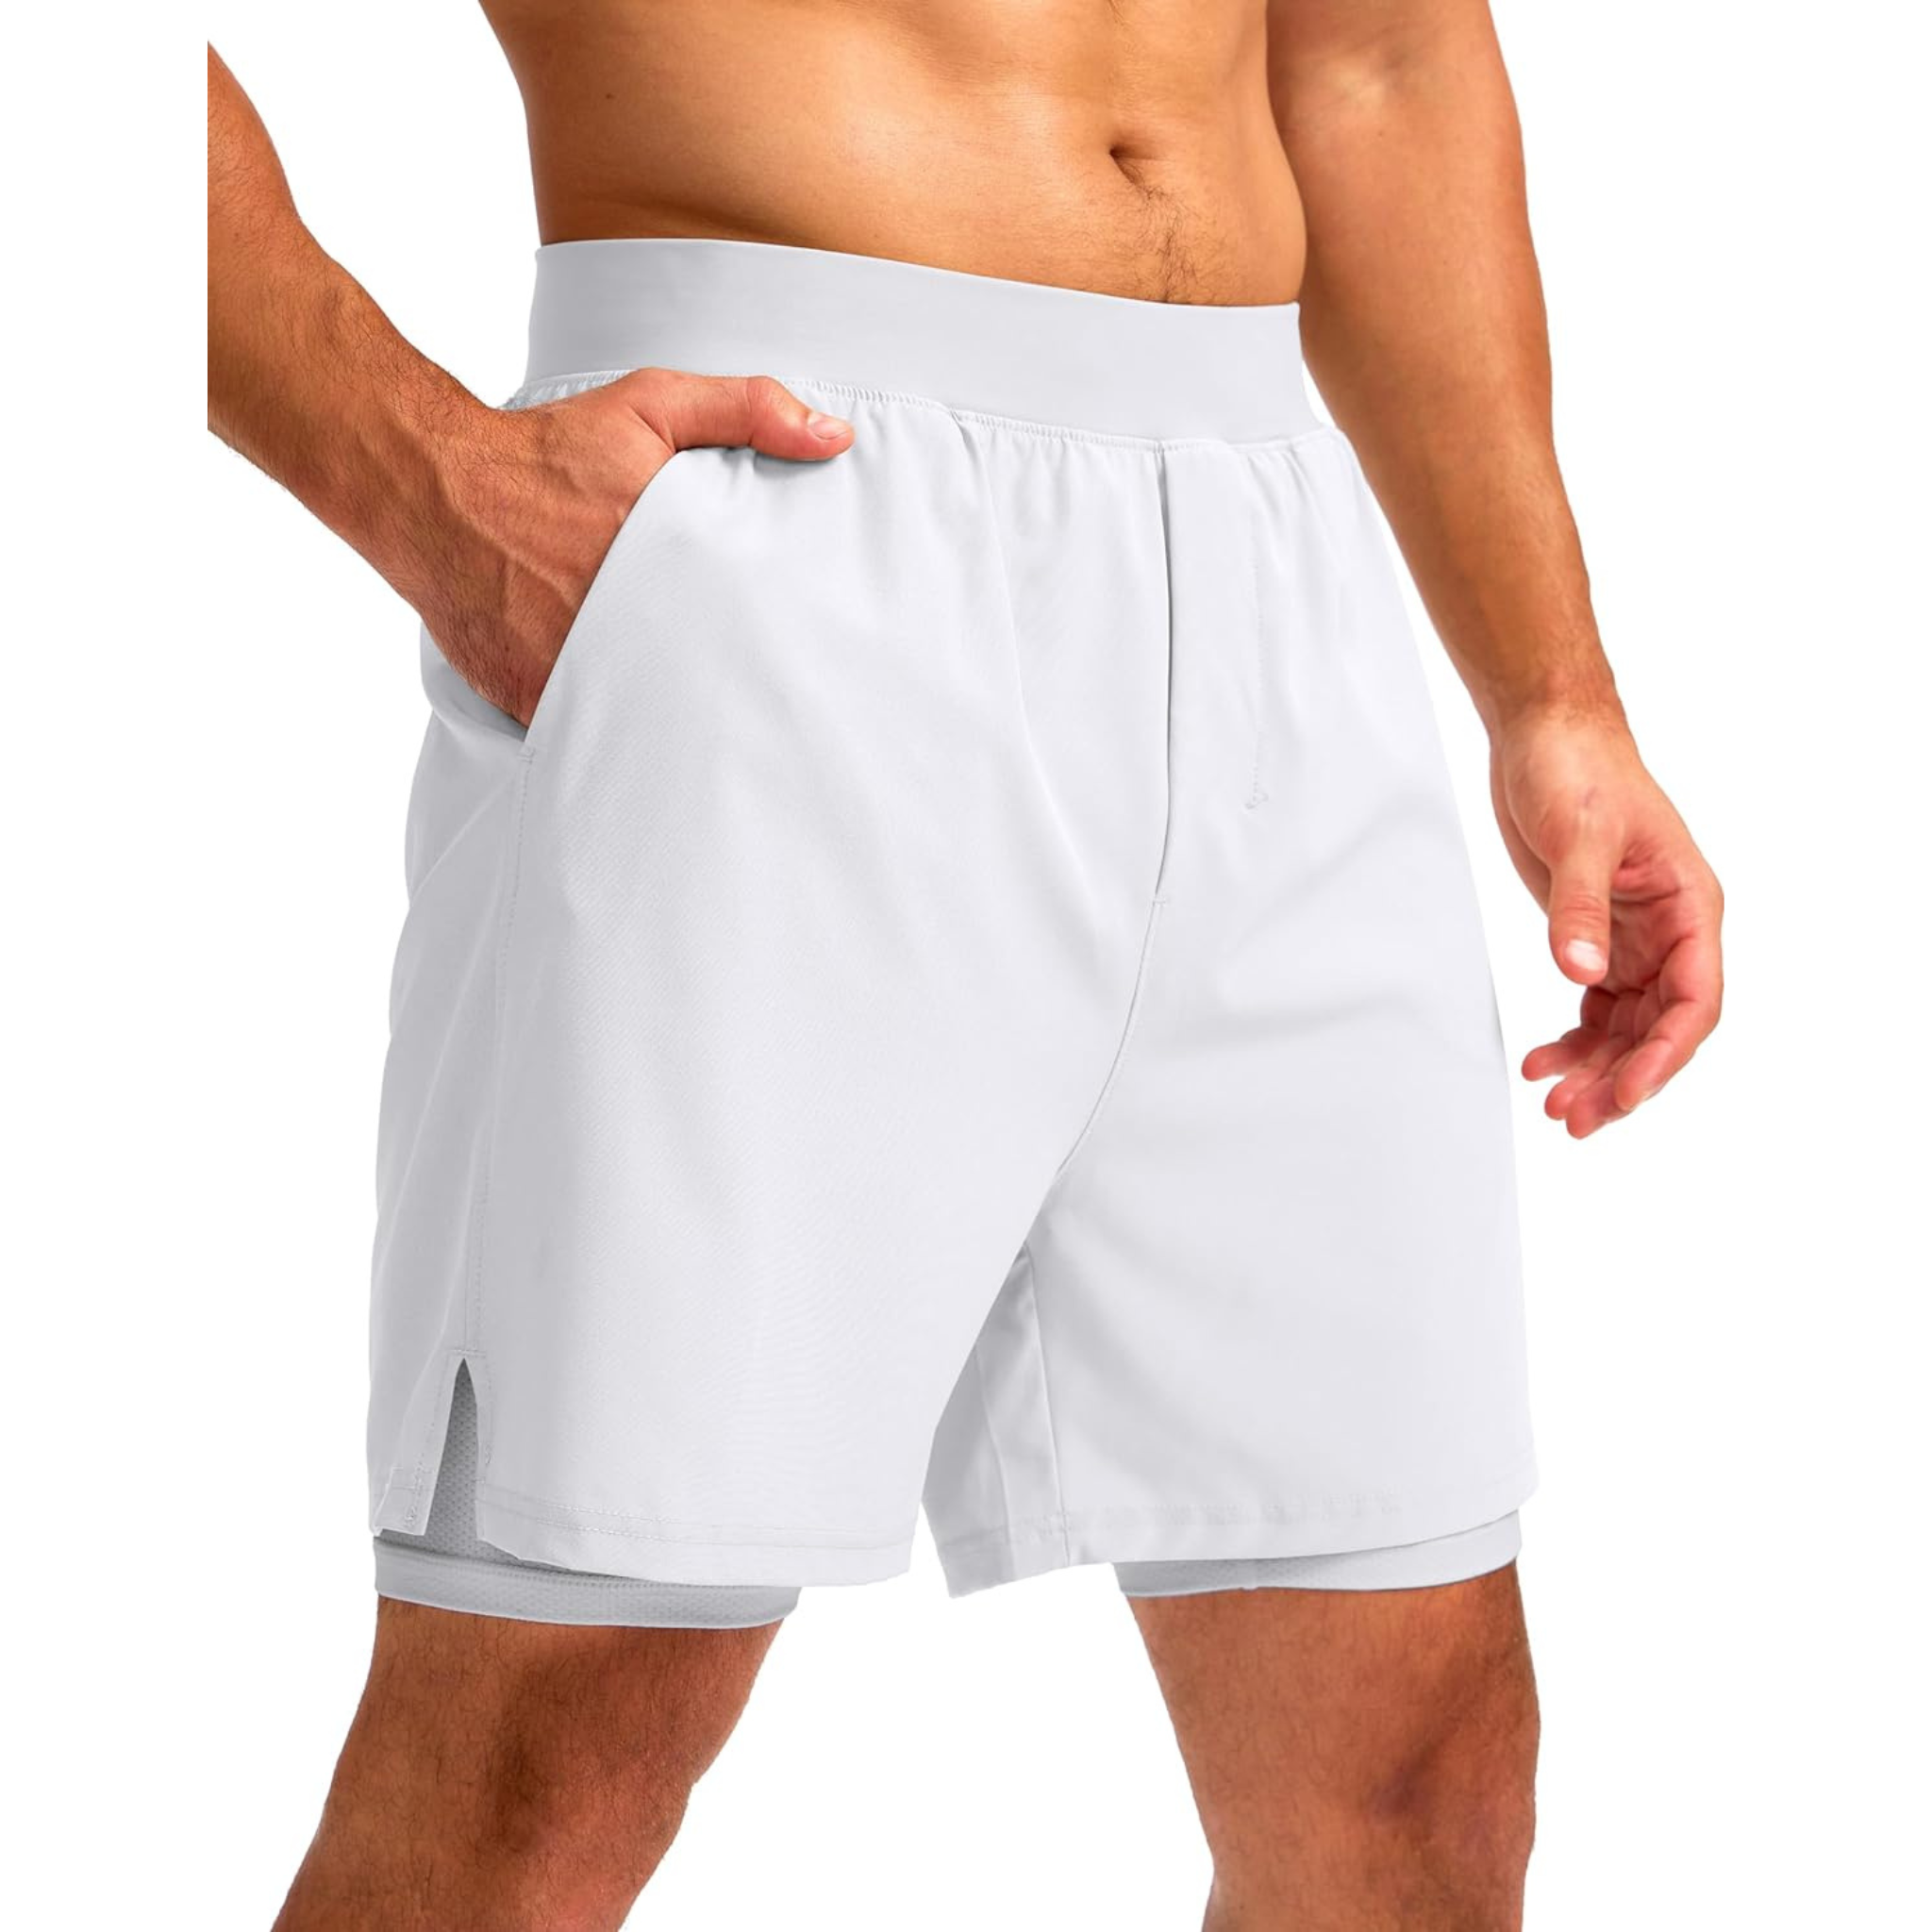 Soothfeel Men's 5" 2-in-1 Running Shorts with 4 Pockets